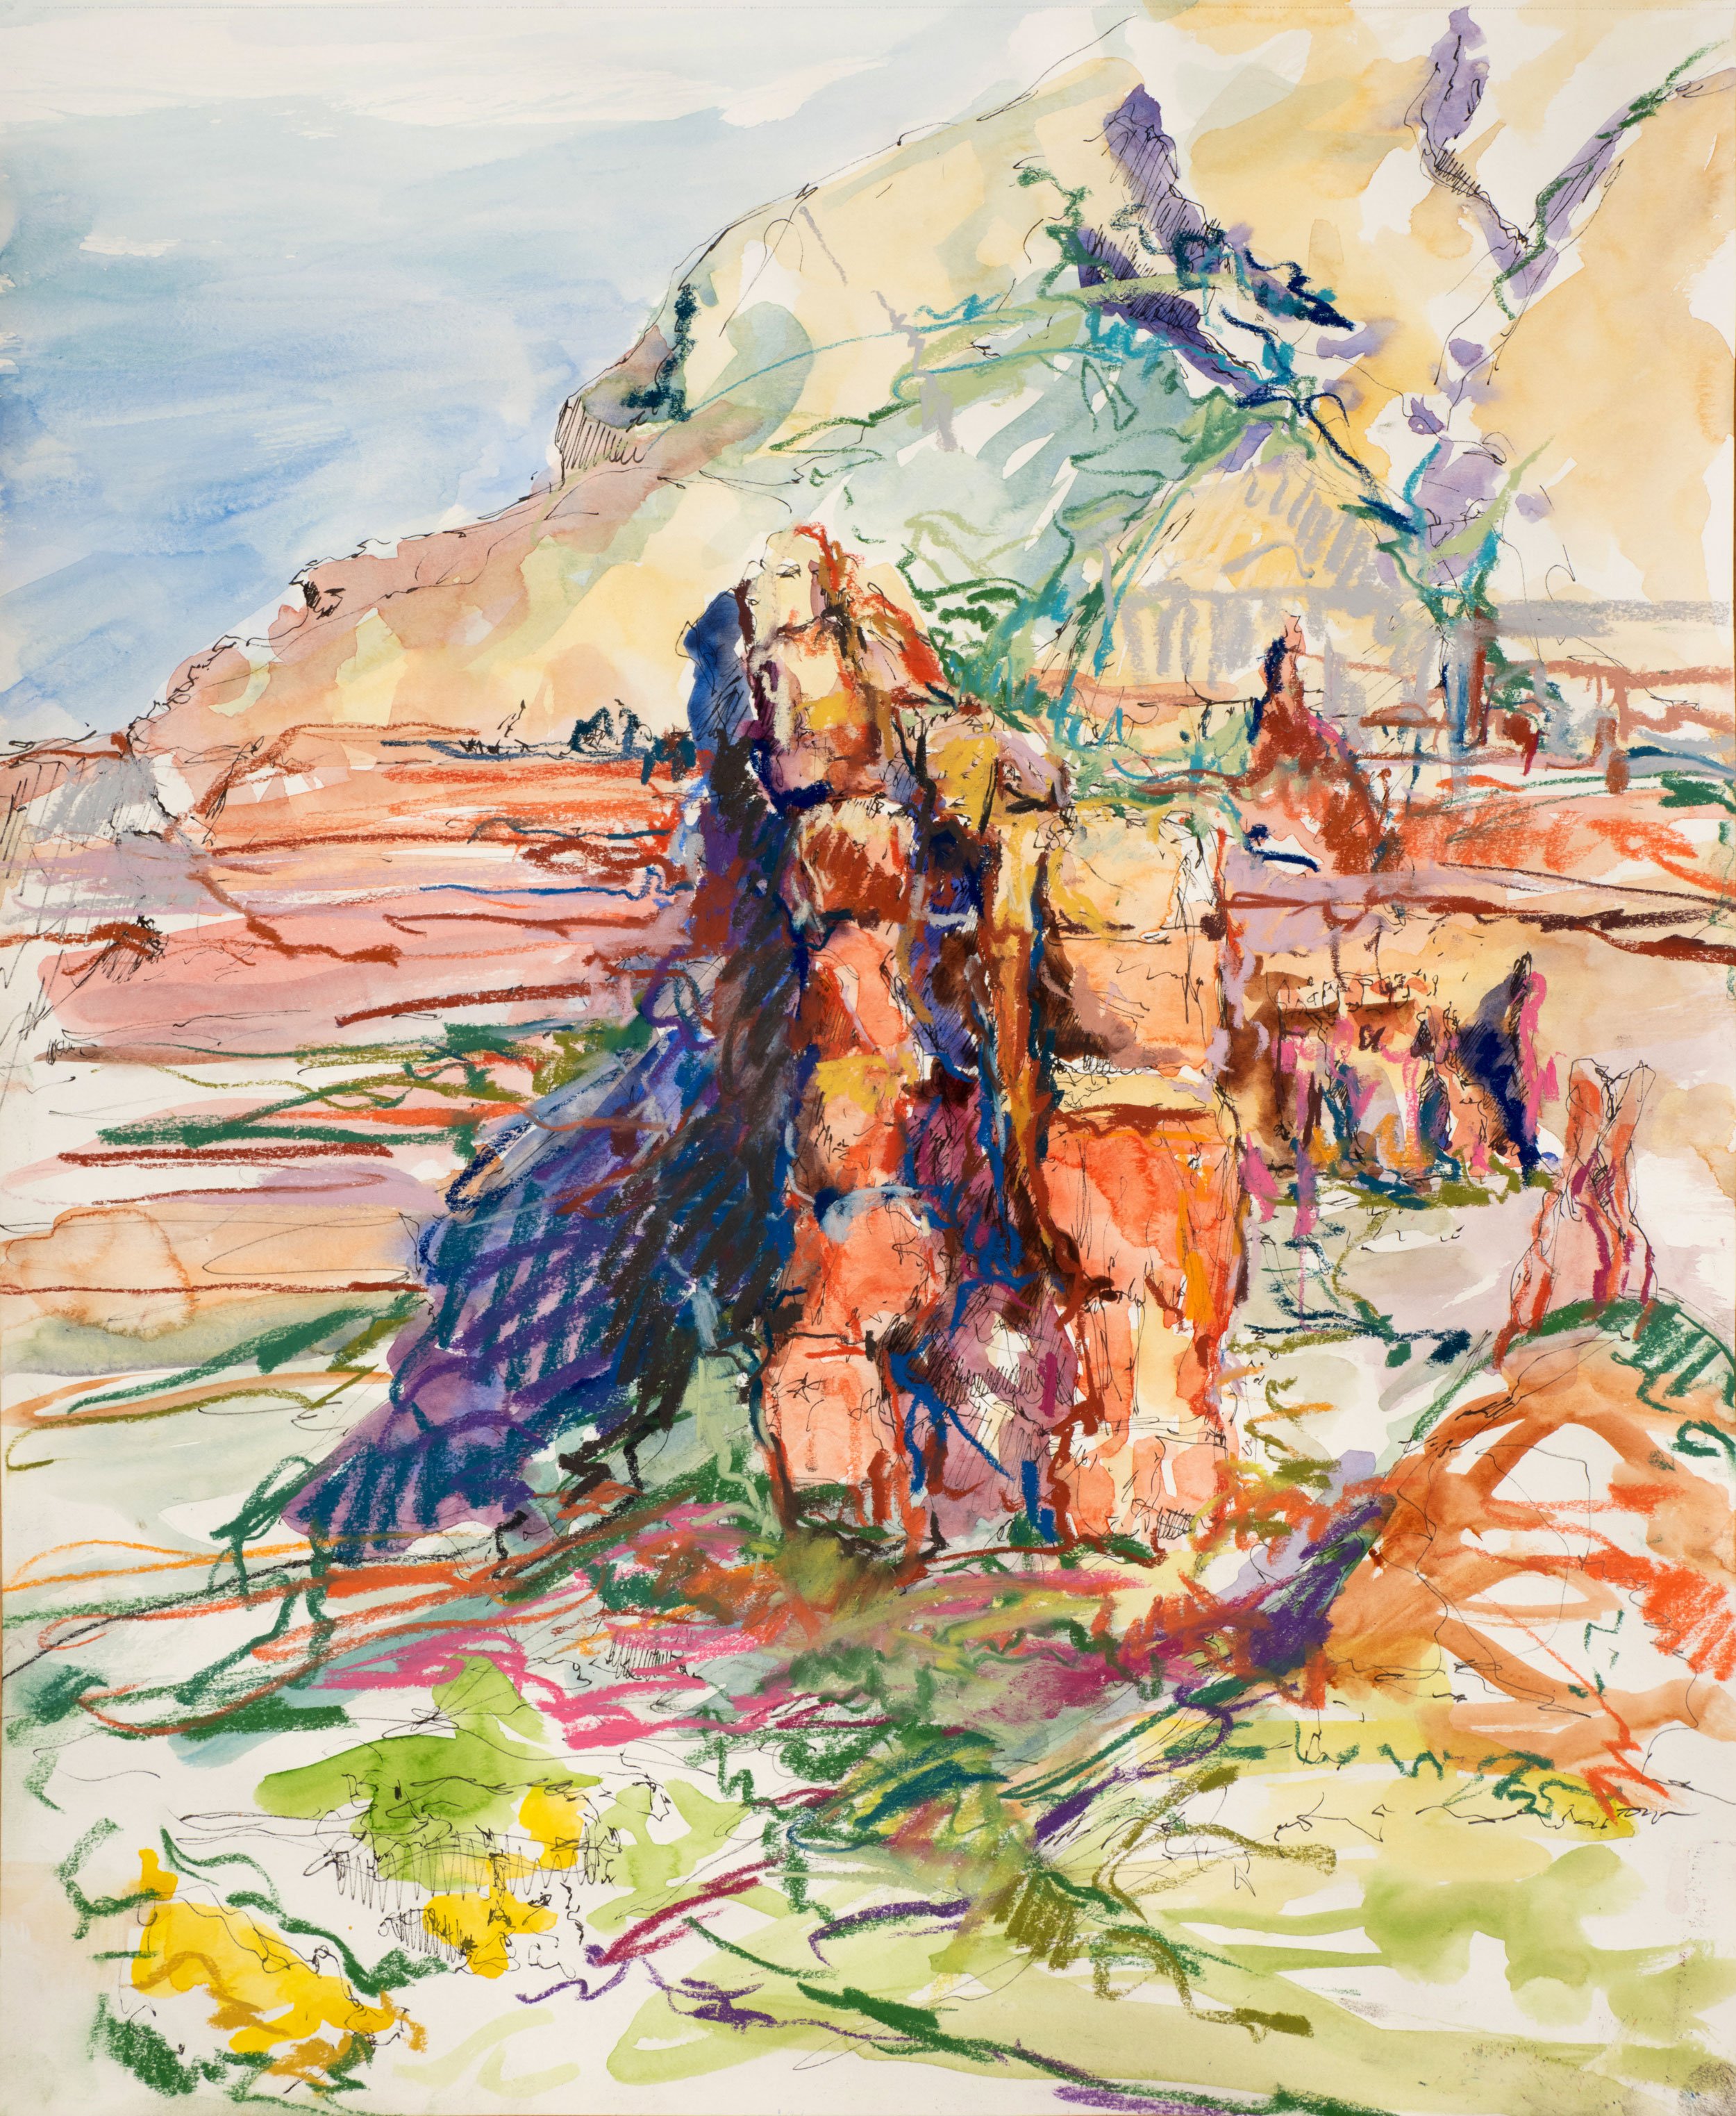  Natural Monument, 2021  |  Mixed Media, 17” x 14”, sold March 2022 by the Sedona Art Center (honorable mention, Members Show) 